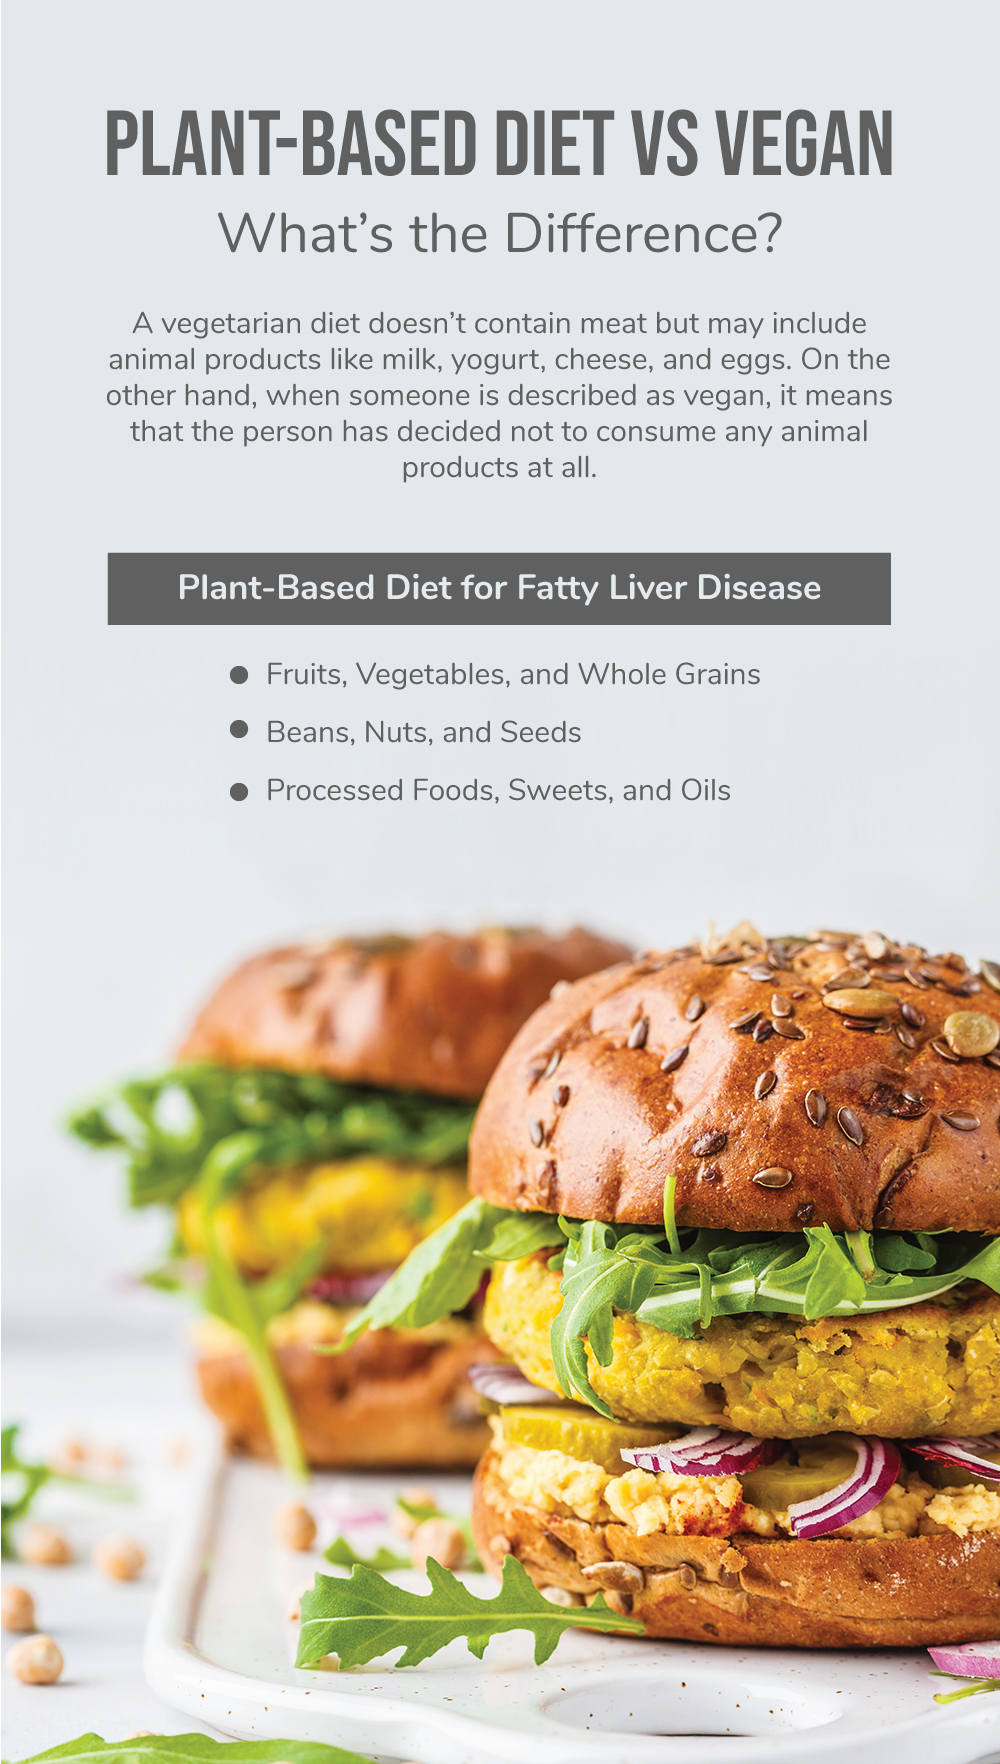 Plant-Based Diet vs Vegan: What’s the Difference?